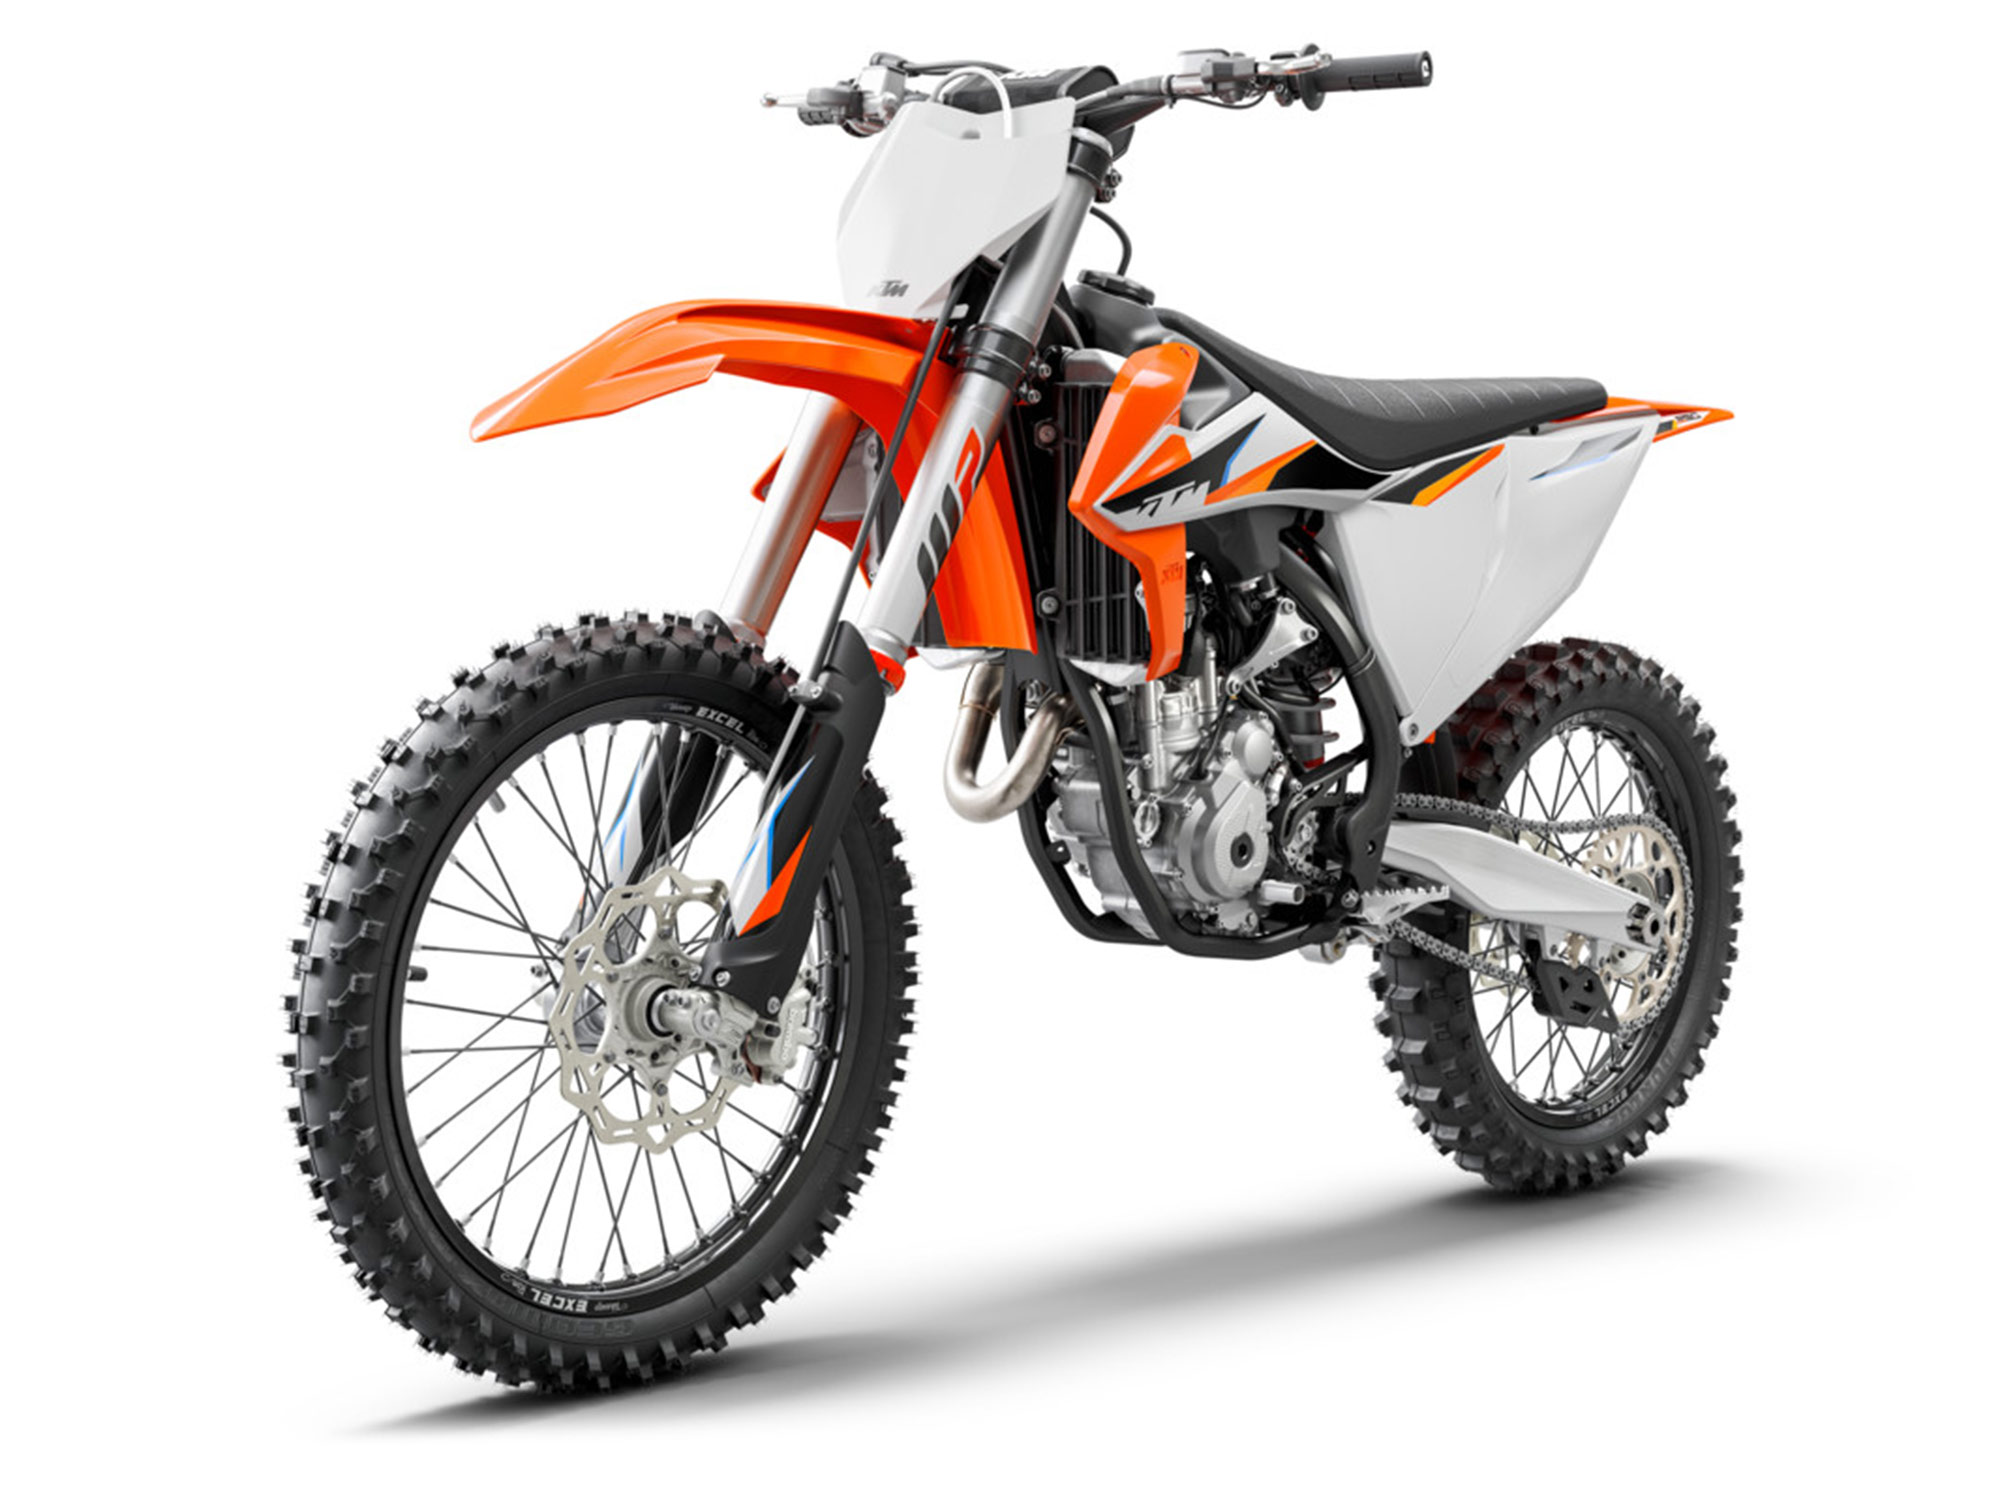 2021 KTM 250 SX-F Buyer's Guide: Specs, Photos, Price | Cycle World